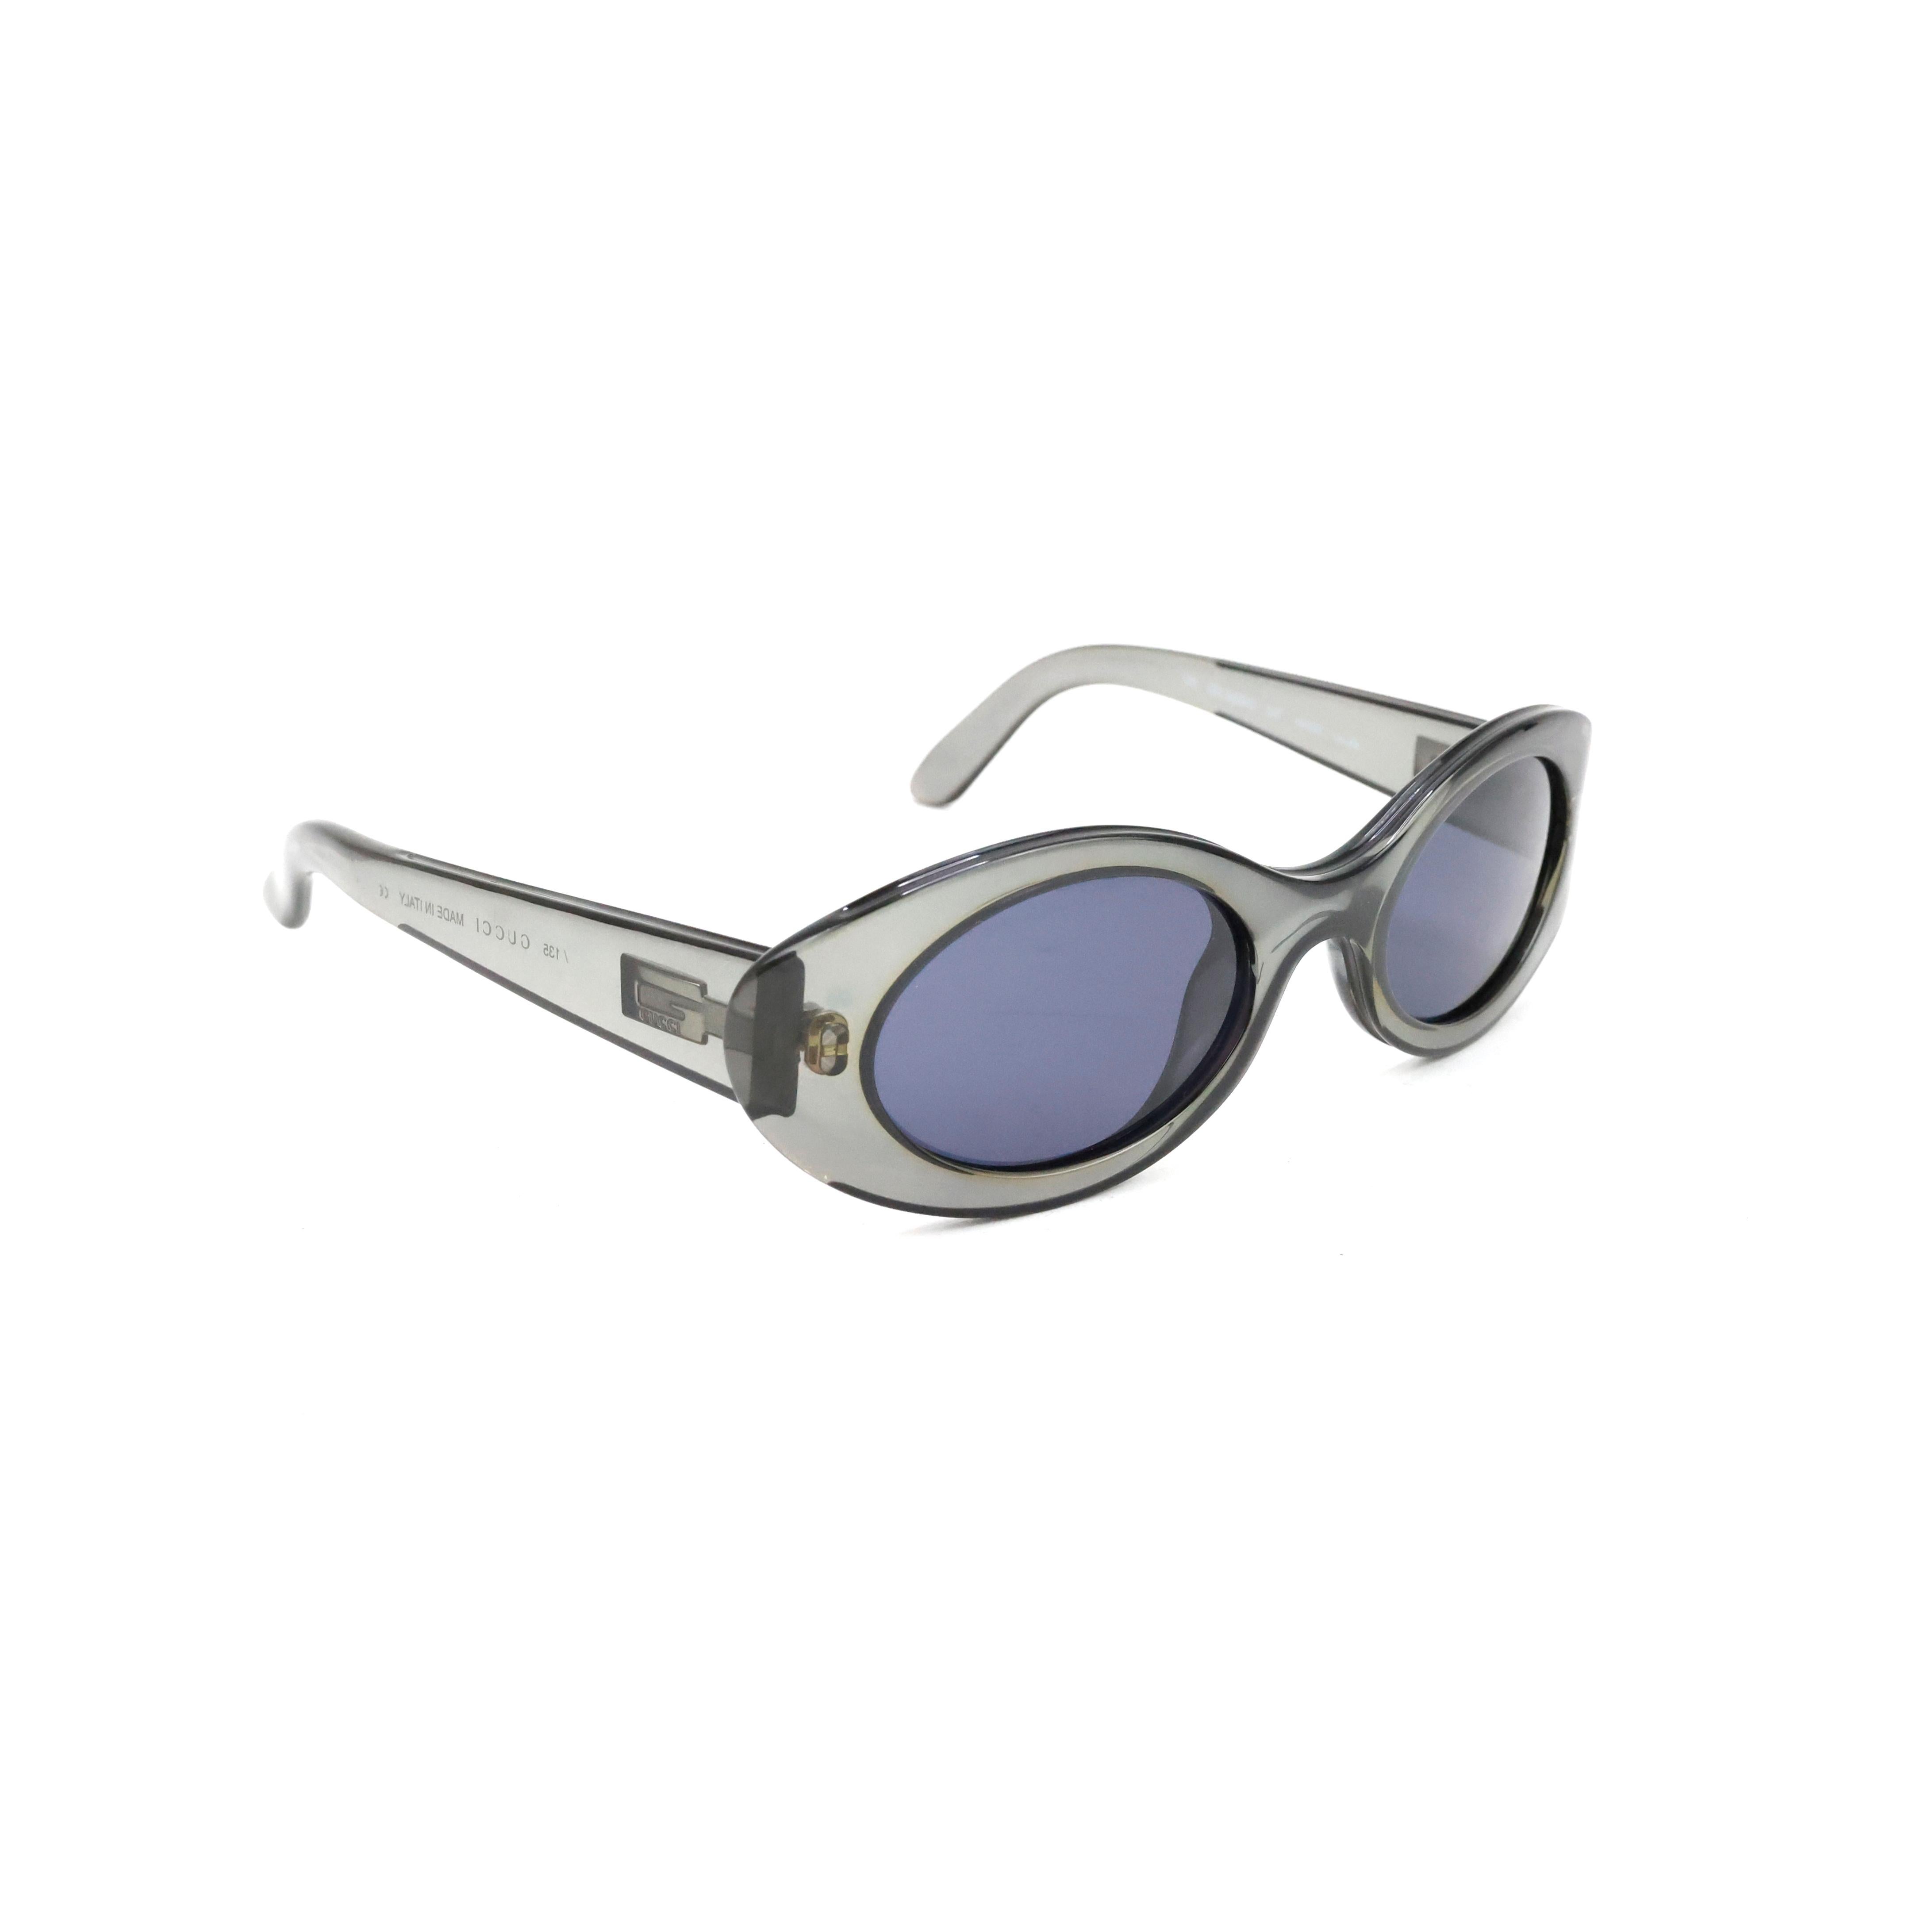 Gucci sunglasses color transparent/grey.

Condition:
Really good.

Packing/accessories:
Case.